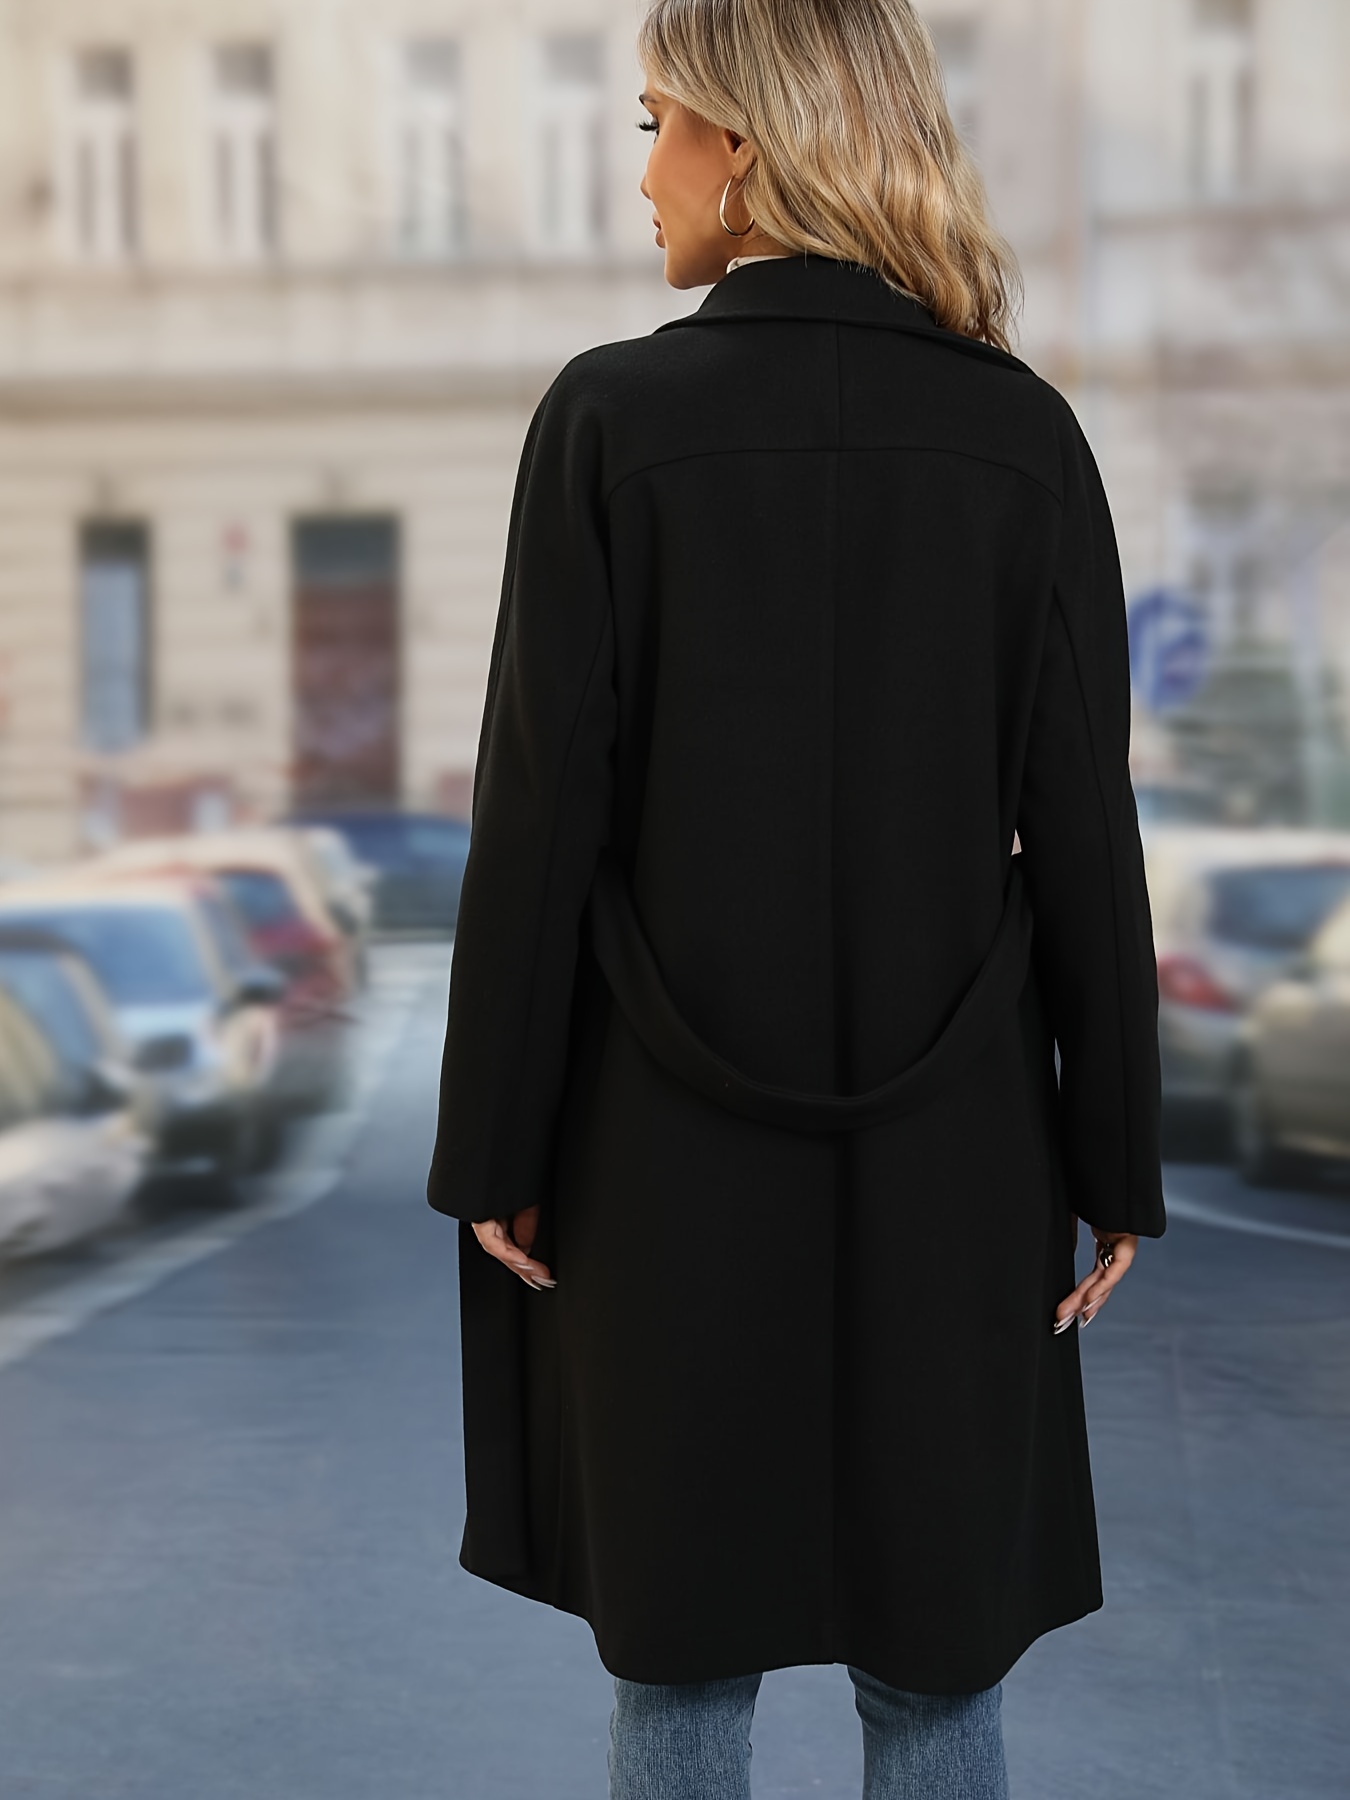 solid double breasted belted overcoat versatile long sleeve midi length thermal winter coat womens clothing